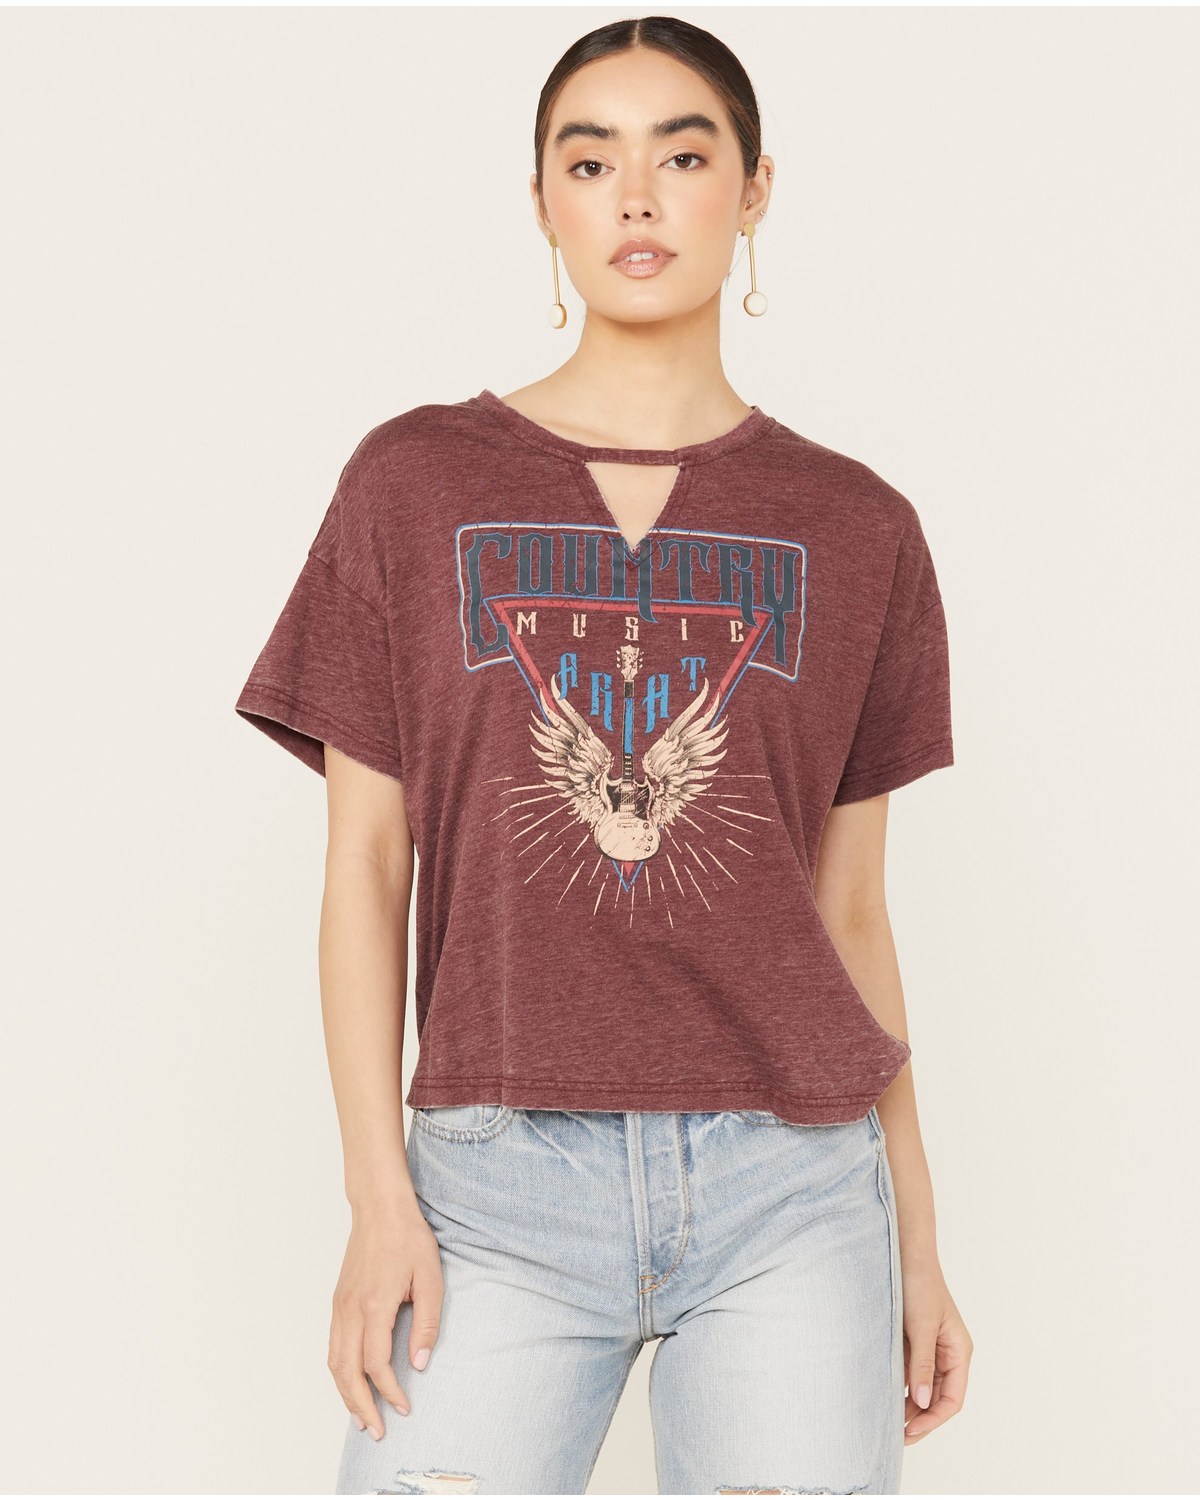 Ariat Women's Rock n Roll Keyhole Neck Short Sleeve Graphic Tee